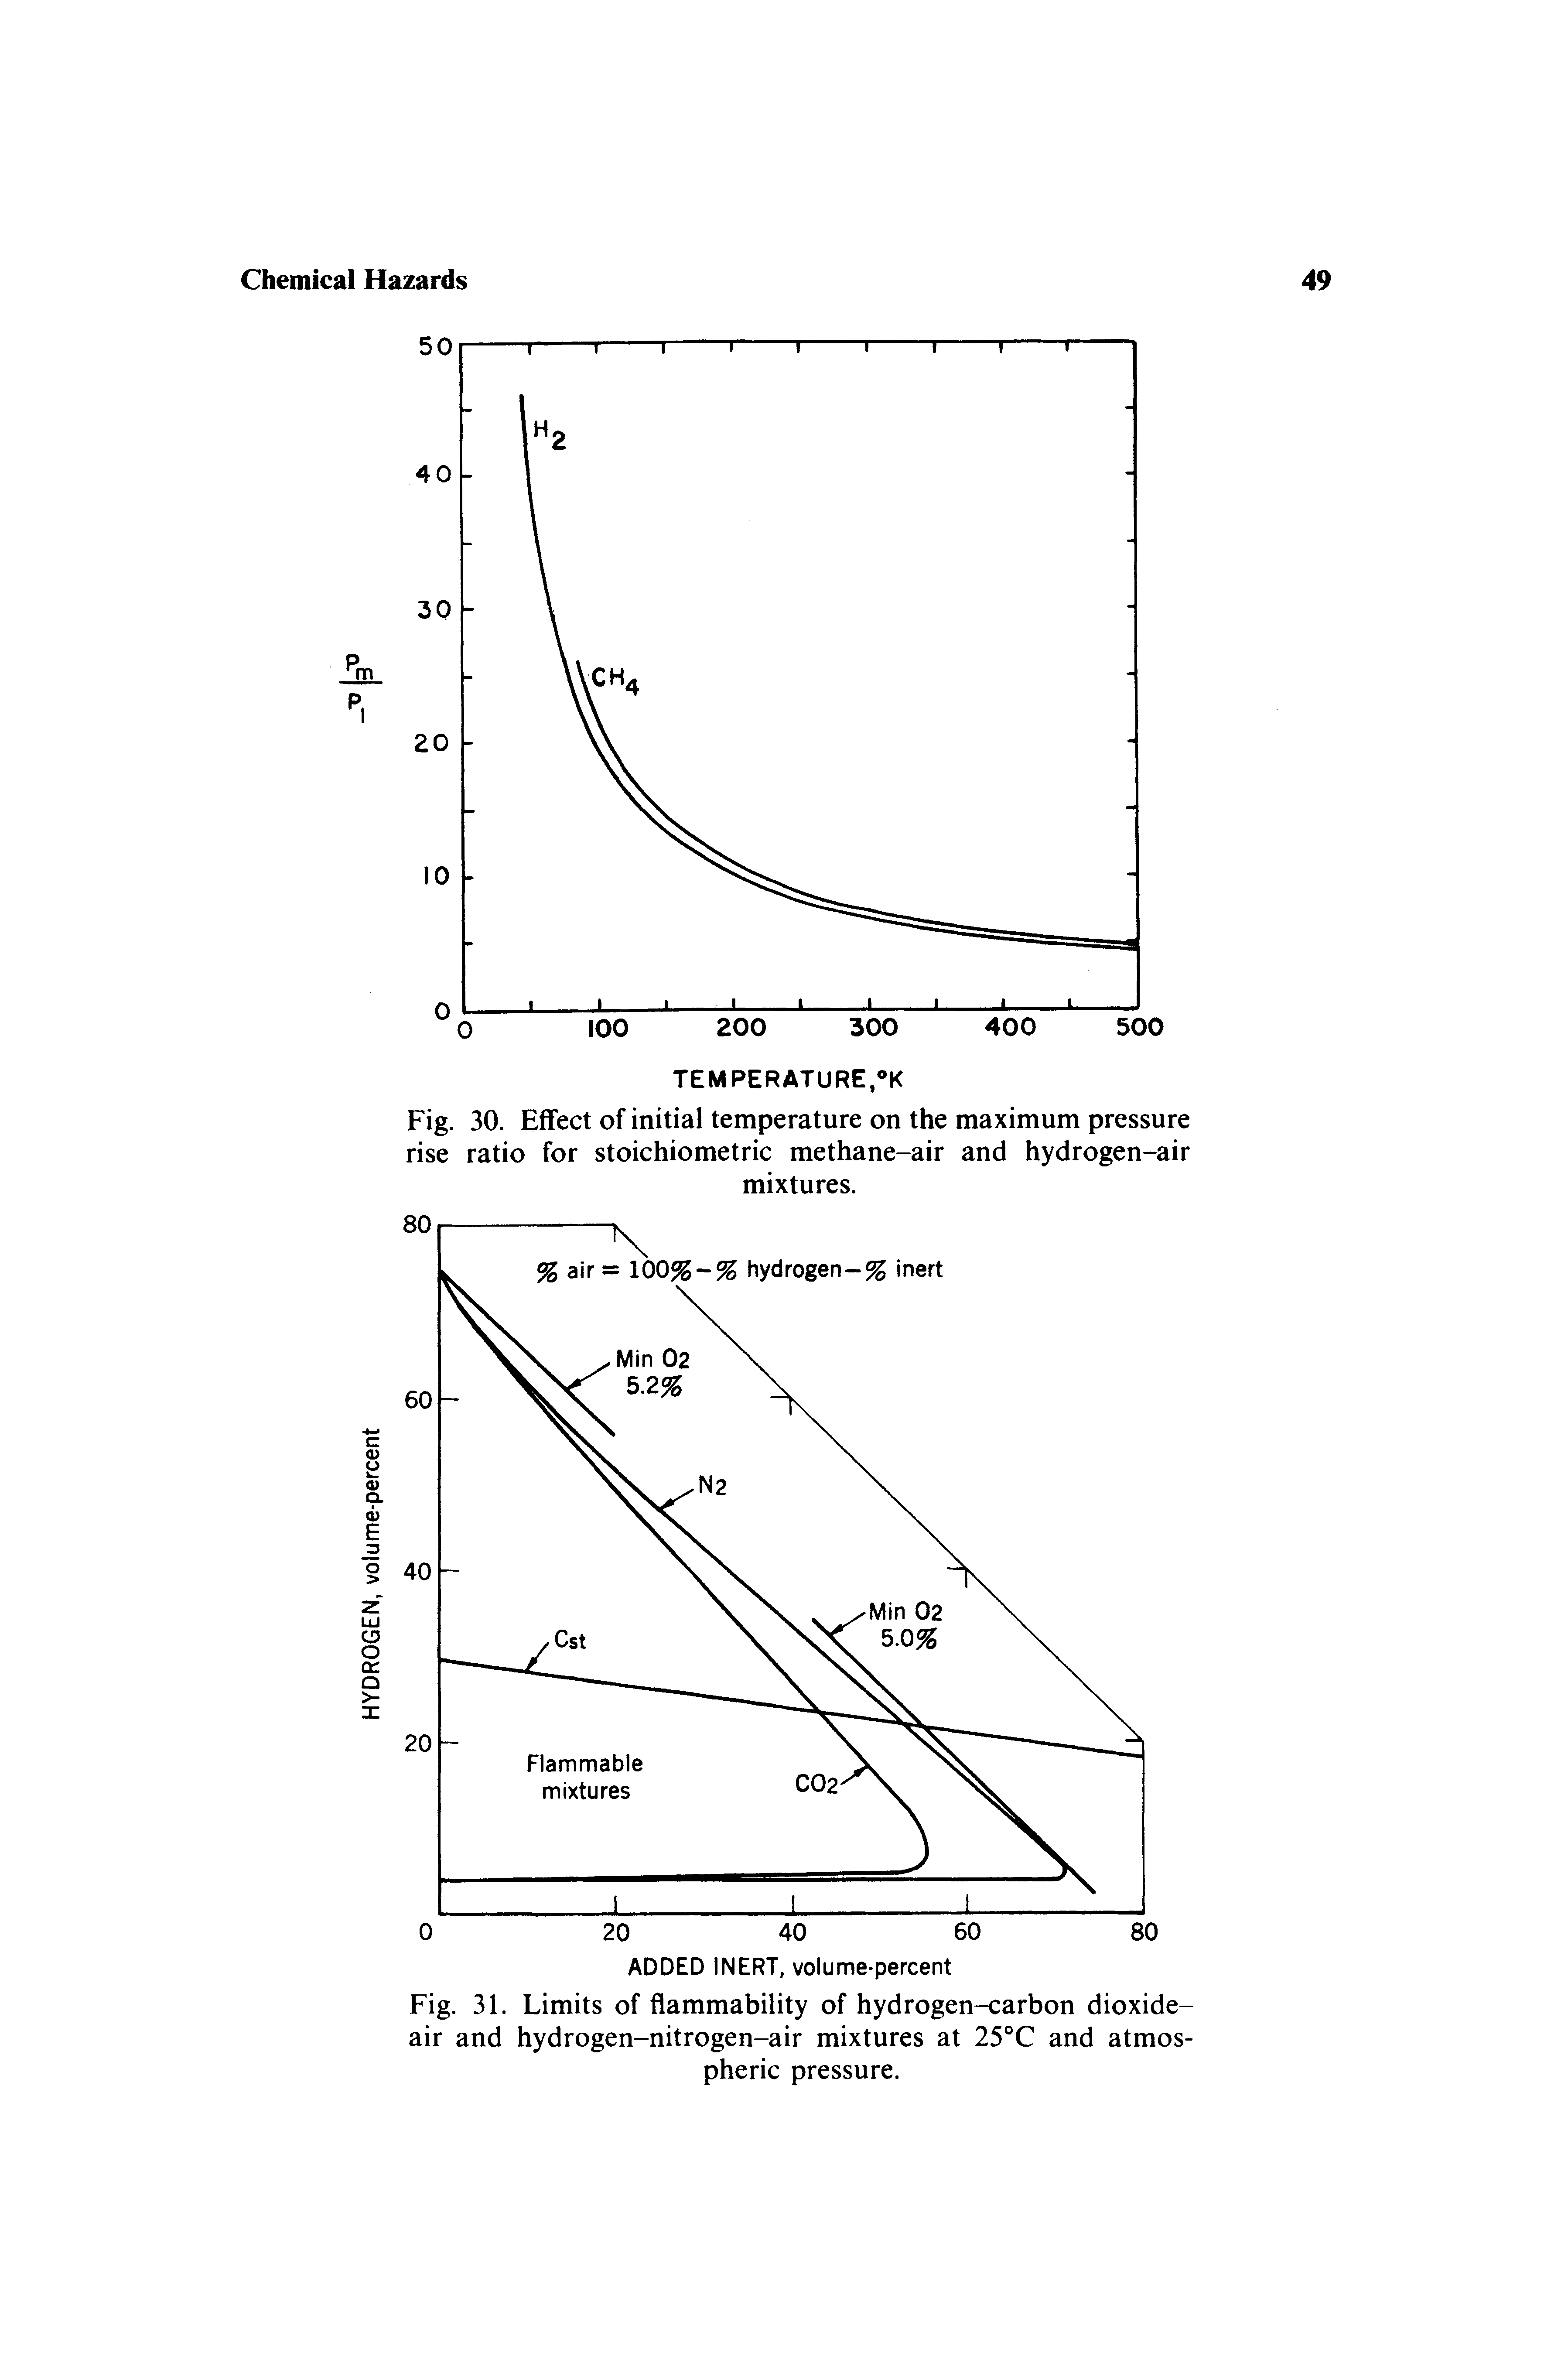 Fig. 31. Limits of flammability of hydrogen-carbon dioxide-air and hydrogen-nitrogen-air mixtures at 25°C and atmospheric pressure.